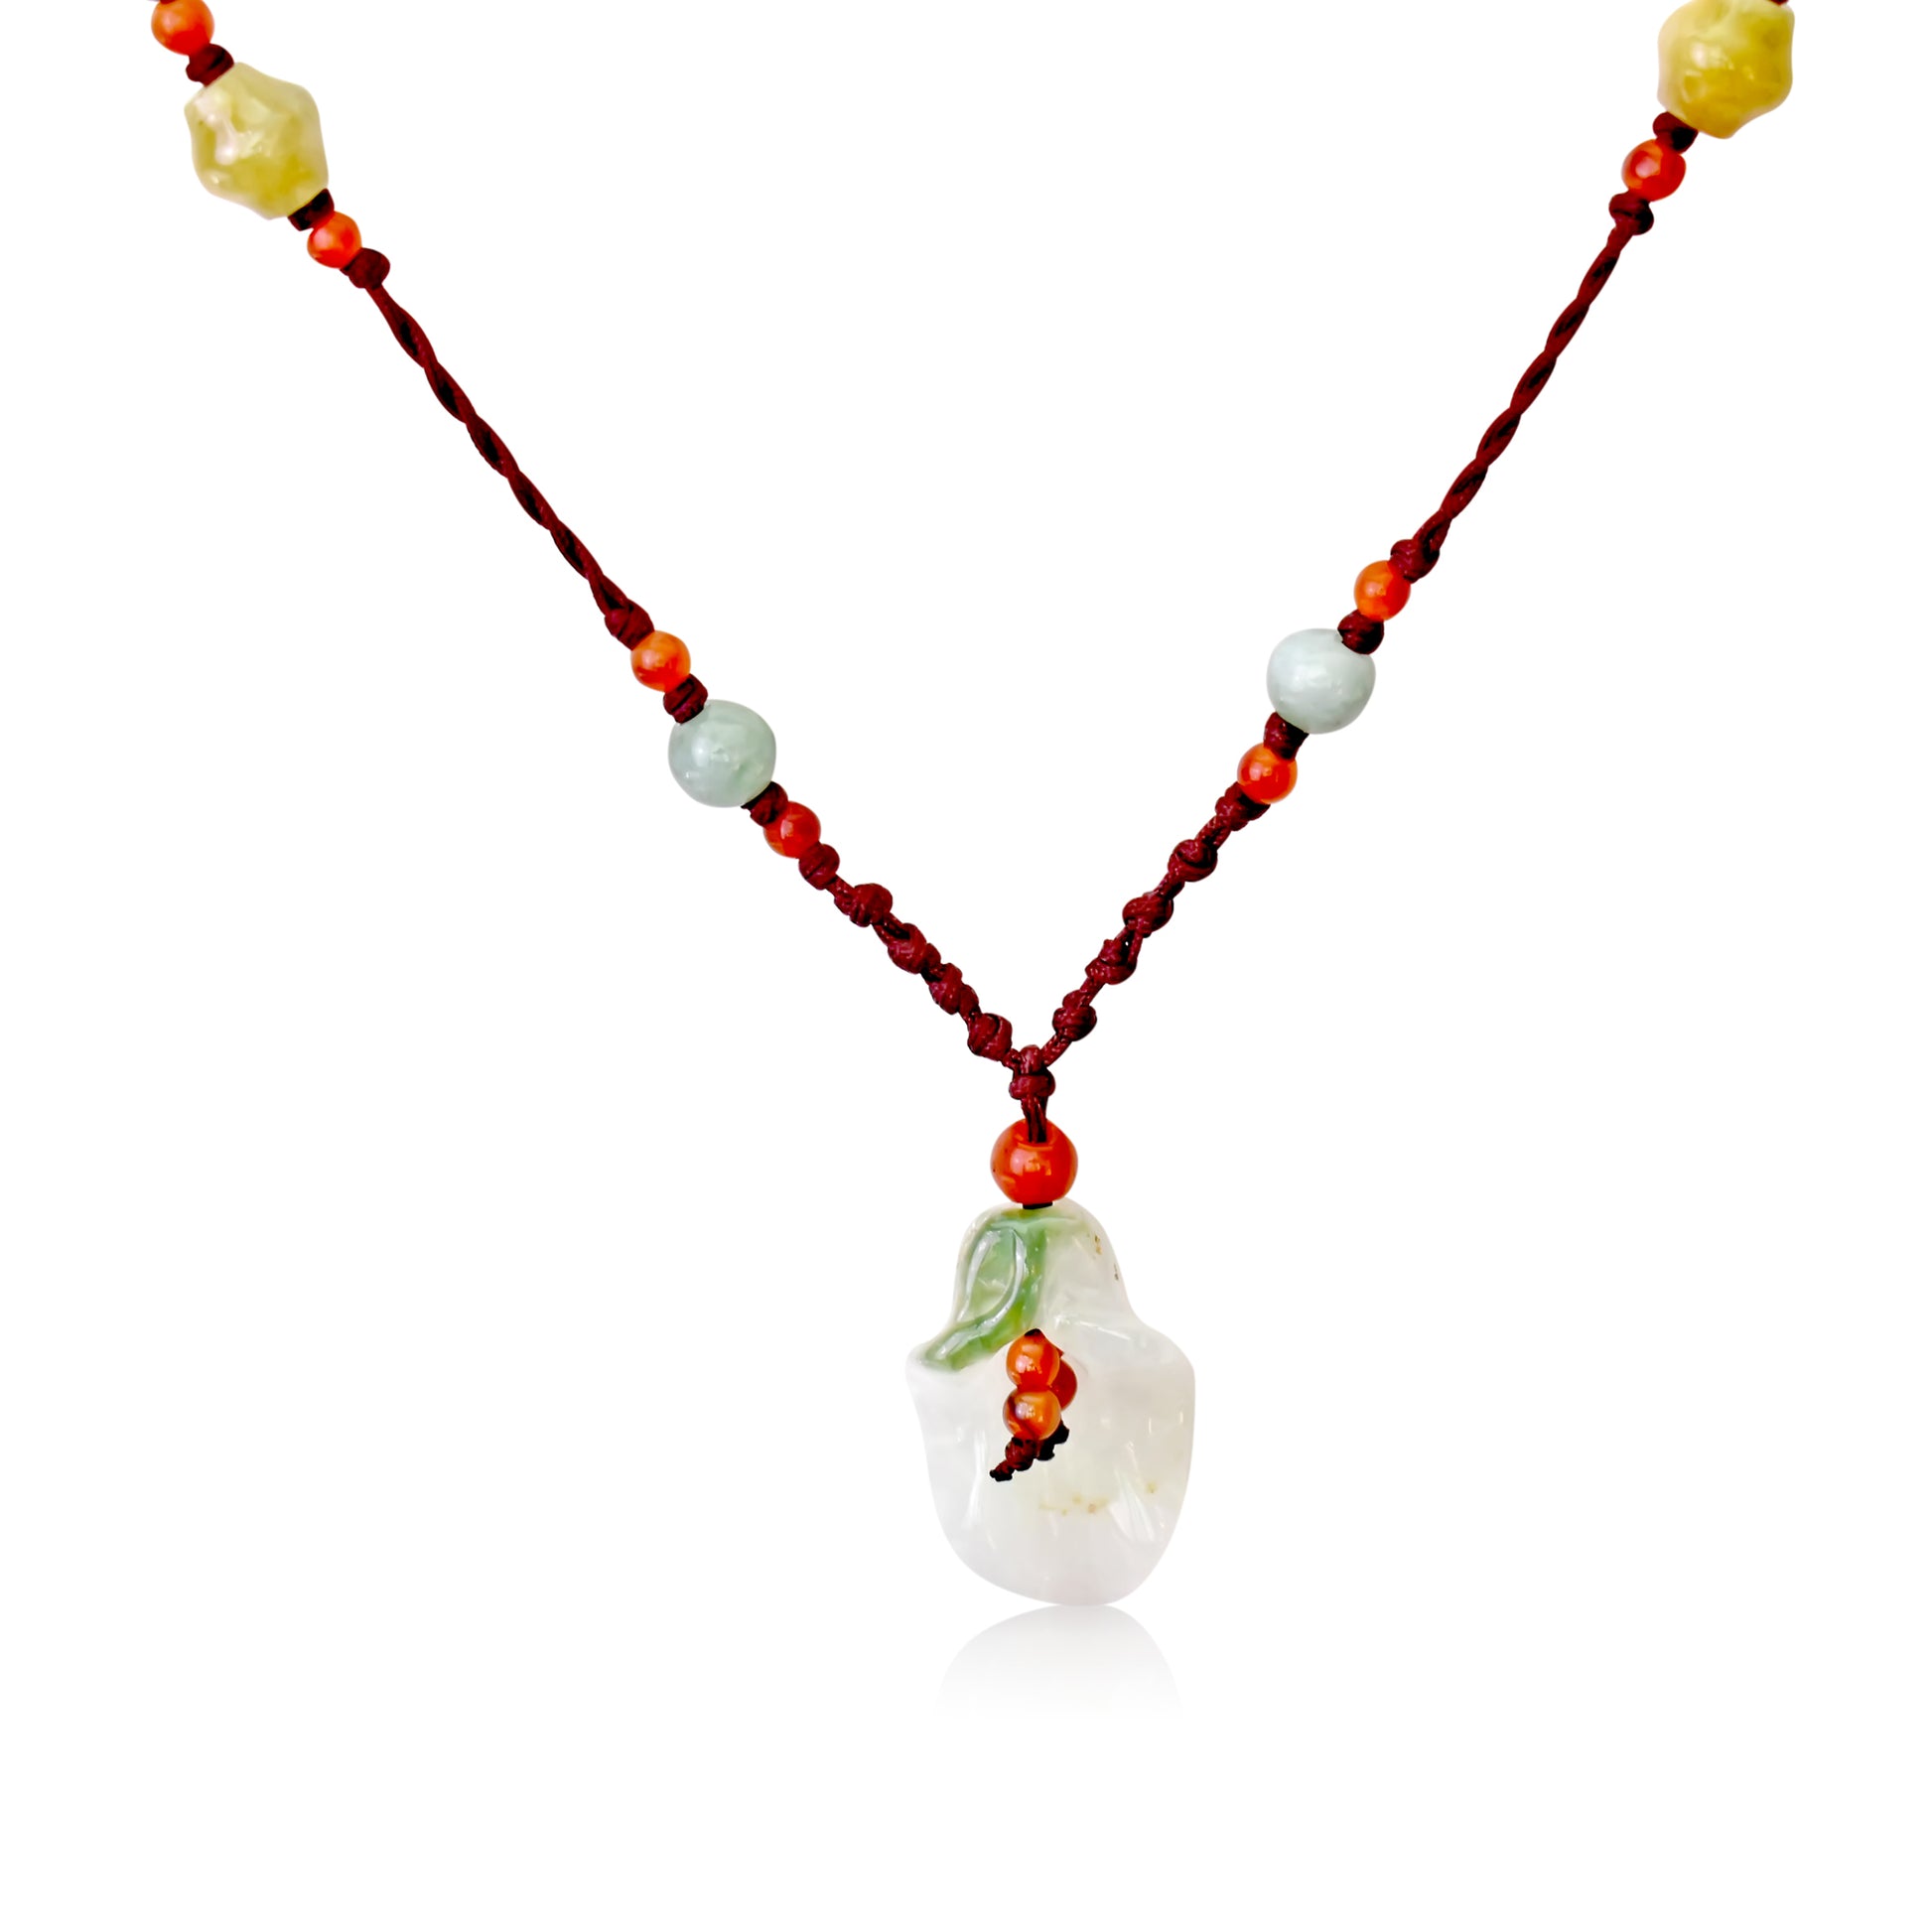 Bellflower Jade Pendant Necklace Handcrafted Gemstone Jewelry with Brown Cord